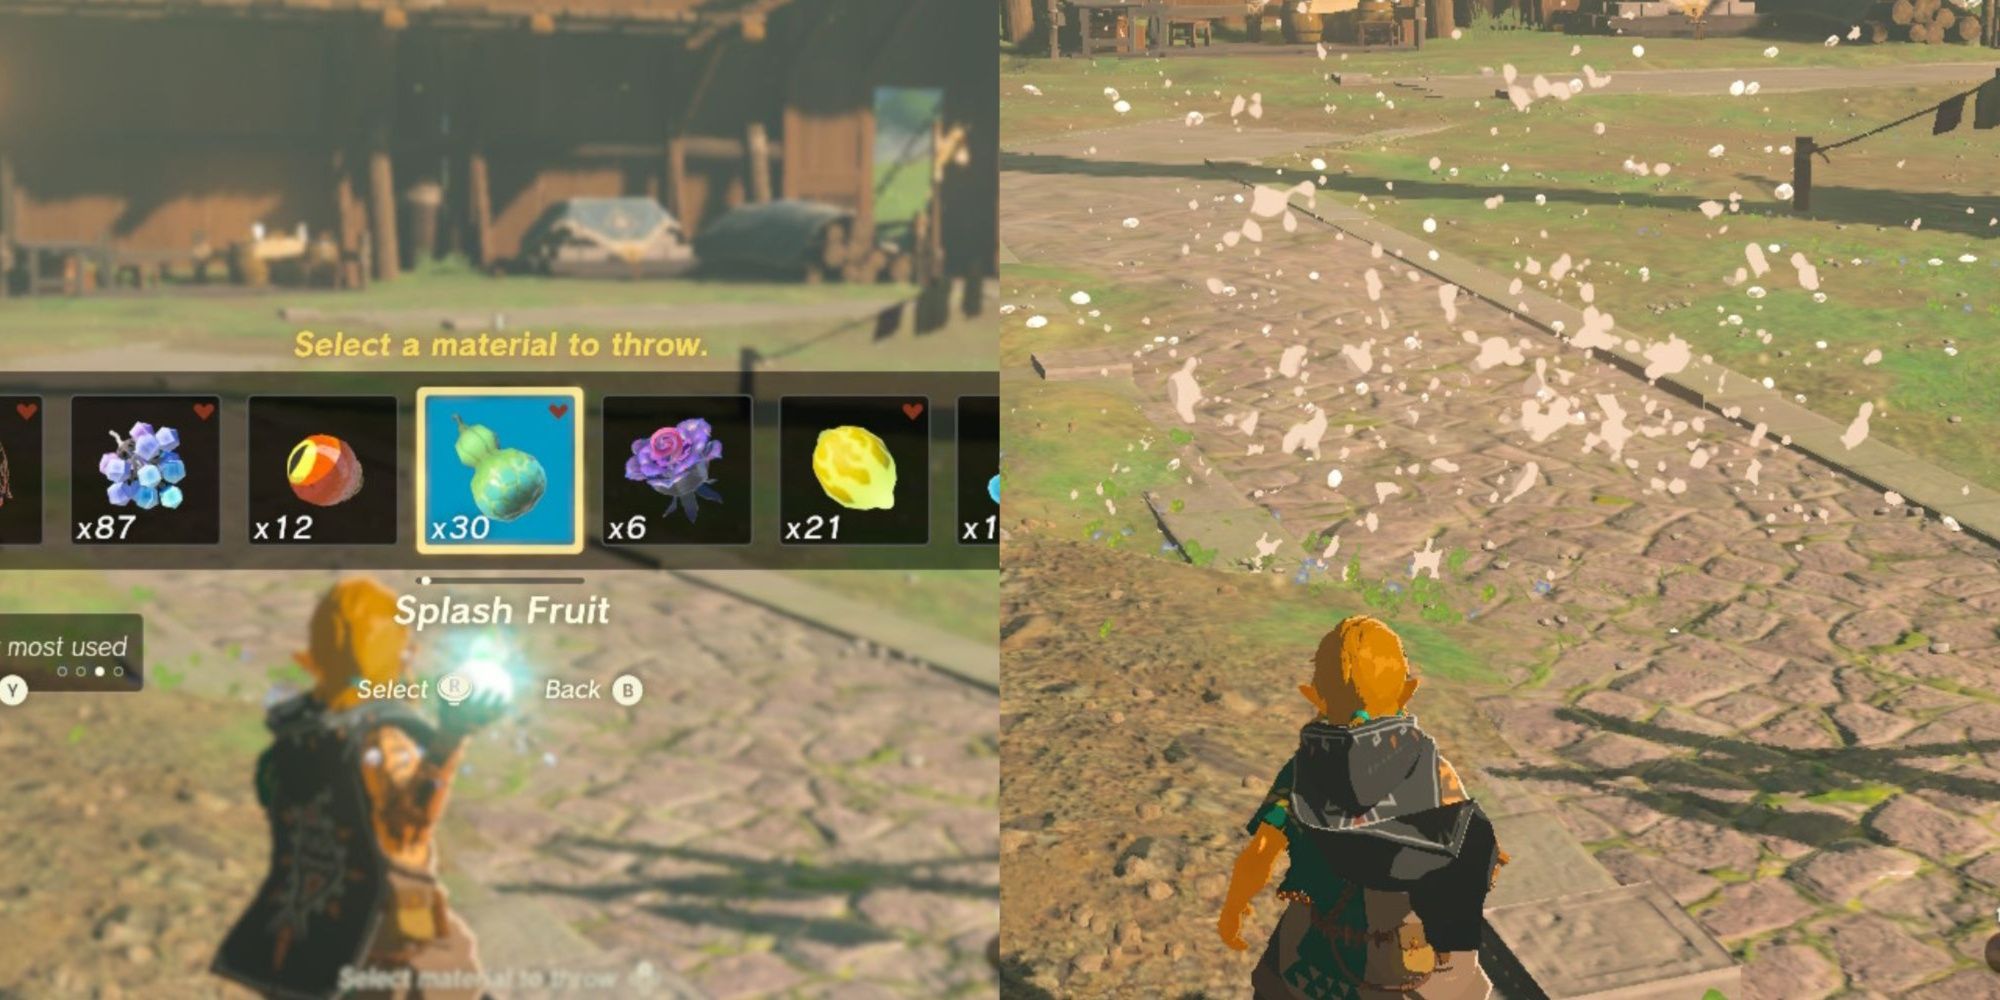 A split image of the item menu and the link that throws the splash fruit